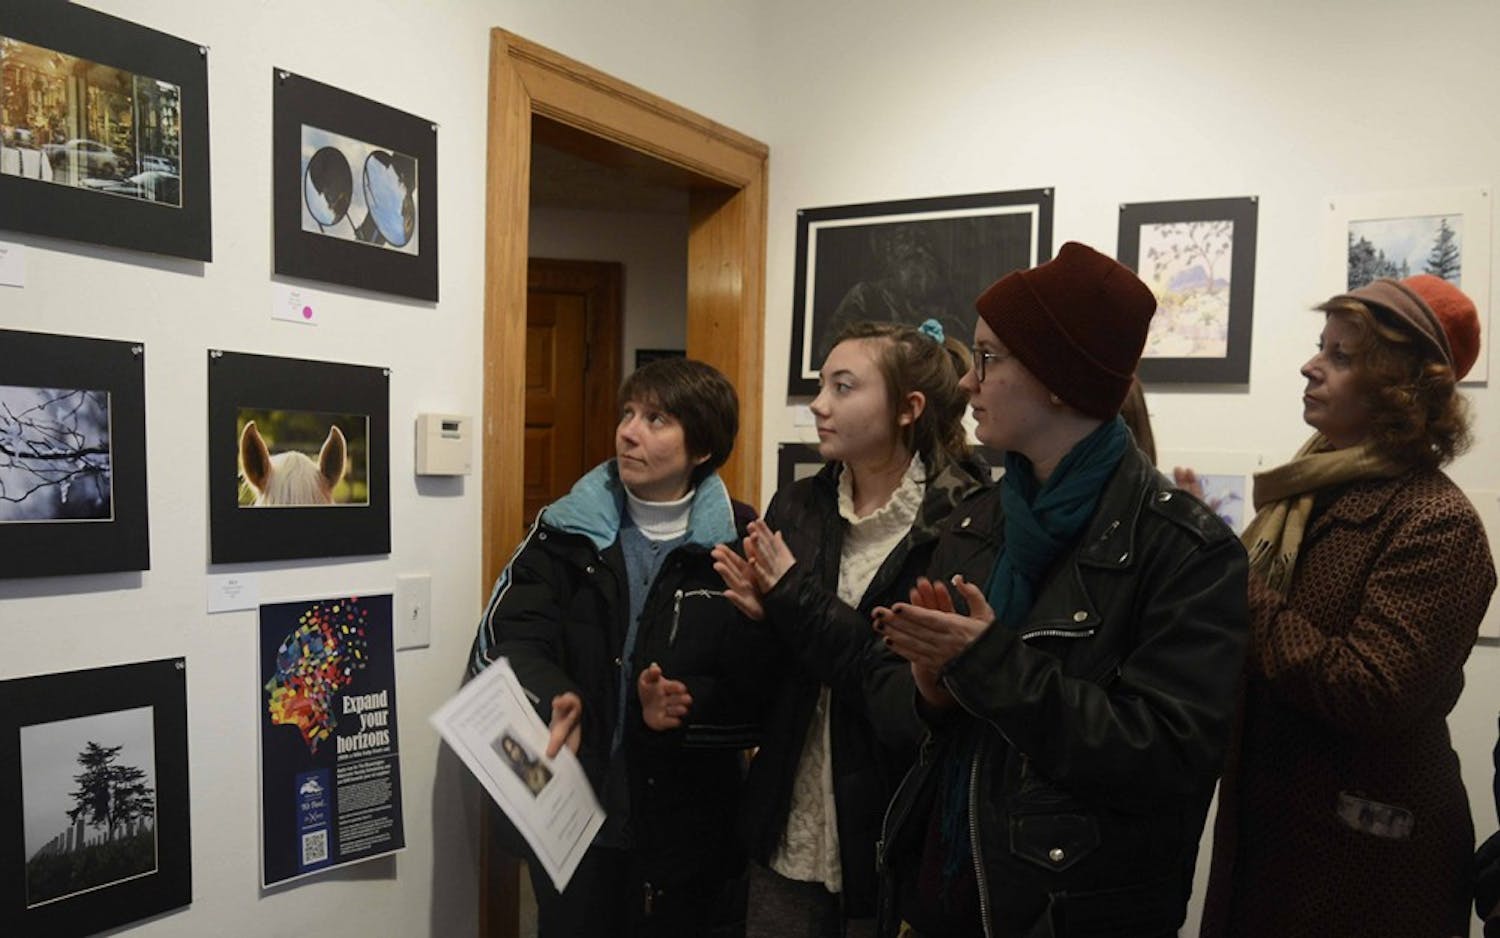 Visitors are celebrating the best photography award during the Juried Arts student show at The Venue, Fine Art & Gifts during the Juried Arts student show, Jan 29. 